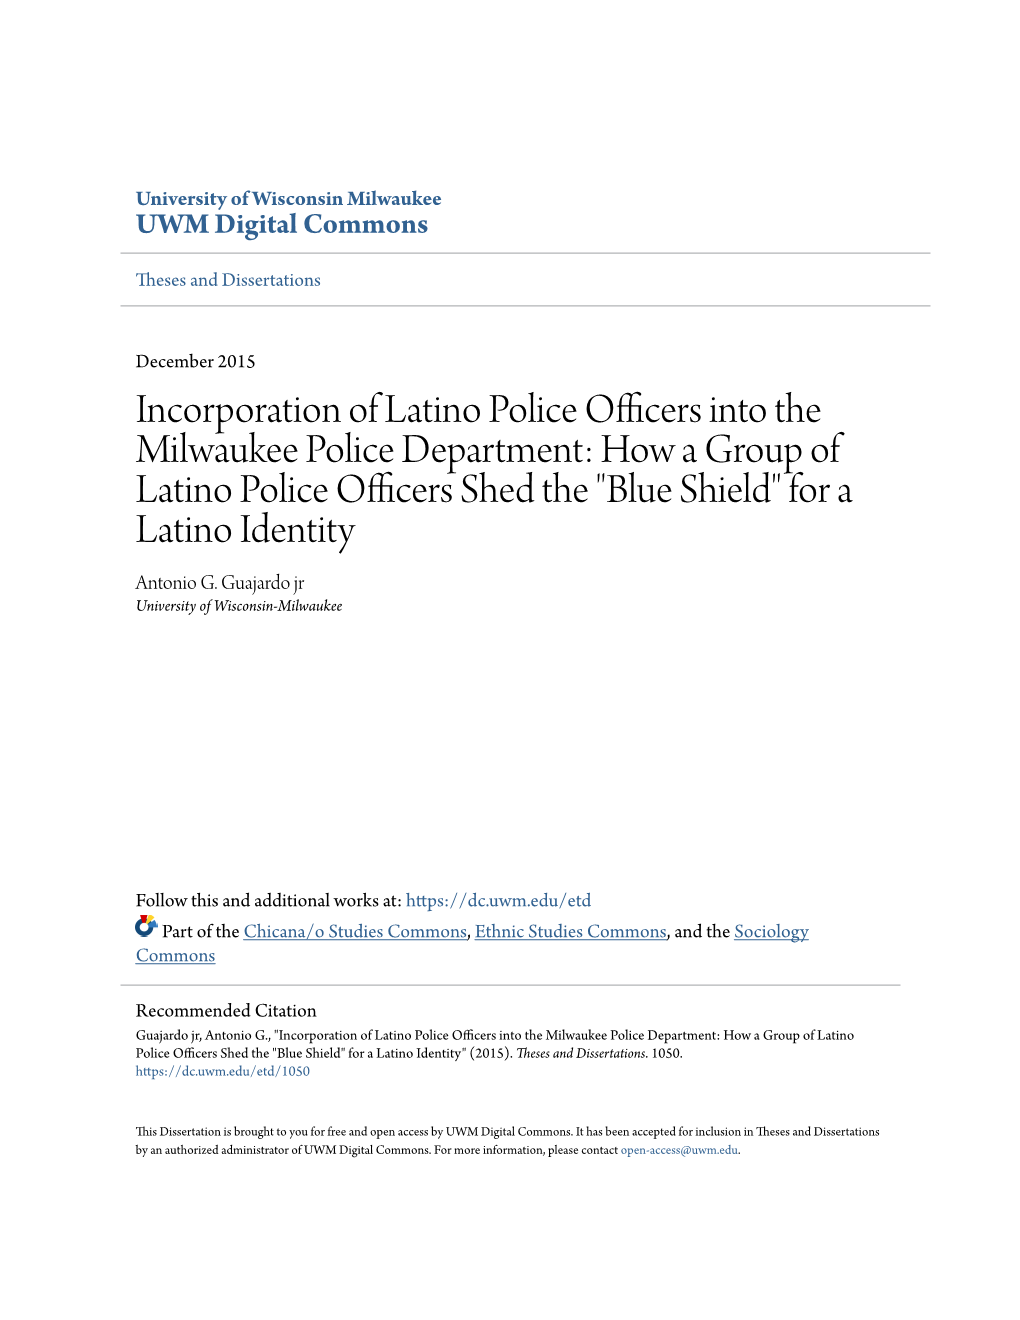 Incorporation of Latino Police Officers Into the Milwaukee Police Department